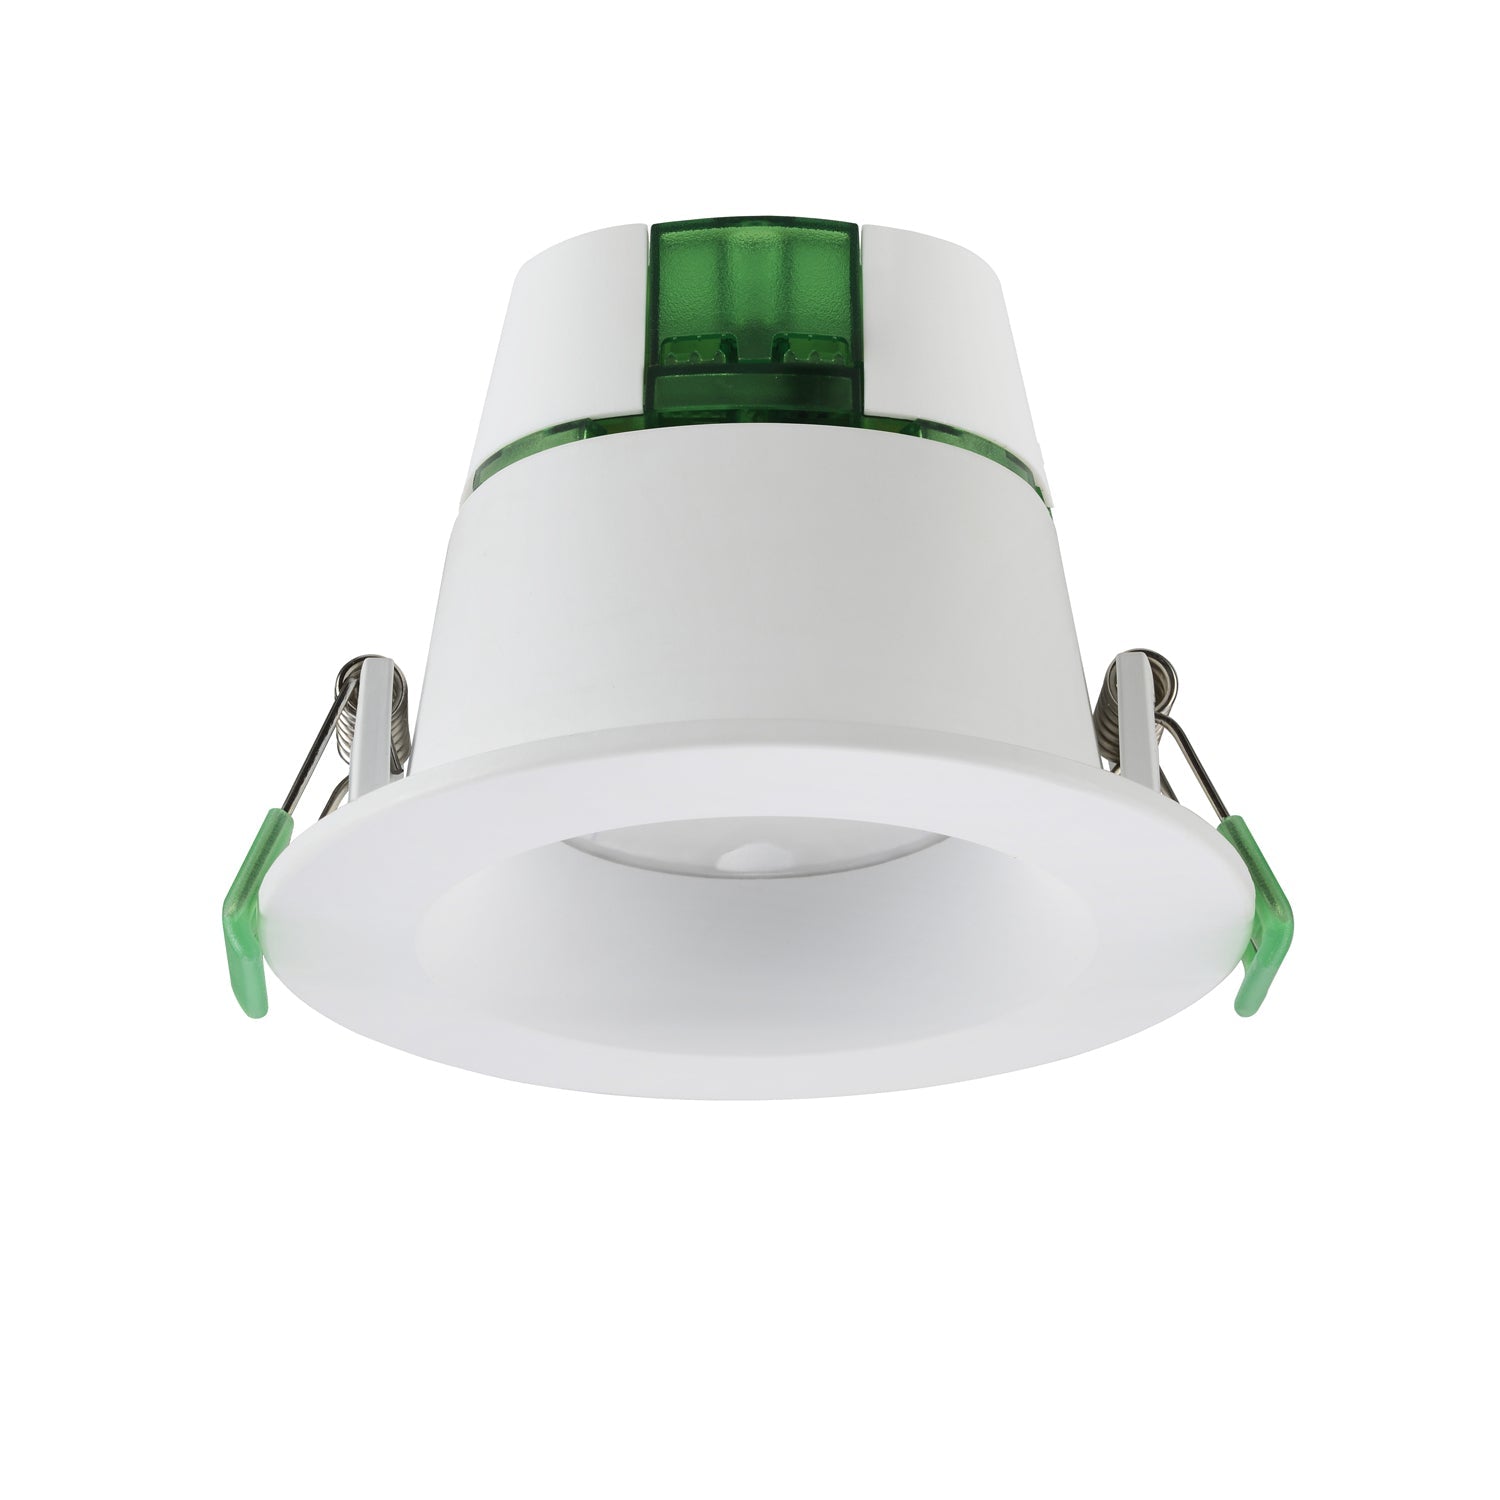 Daintree 809 - Front View - Recessed Downlight - Tricolour - 9W - IP44- Dimmable - 90mm Downlight 